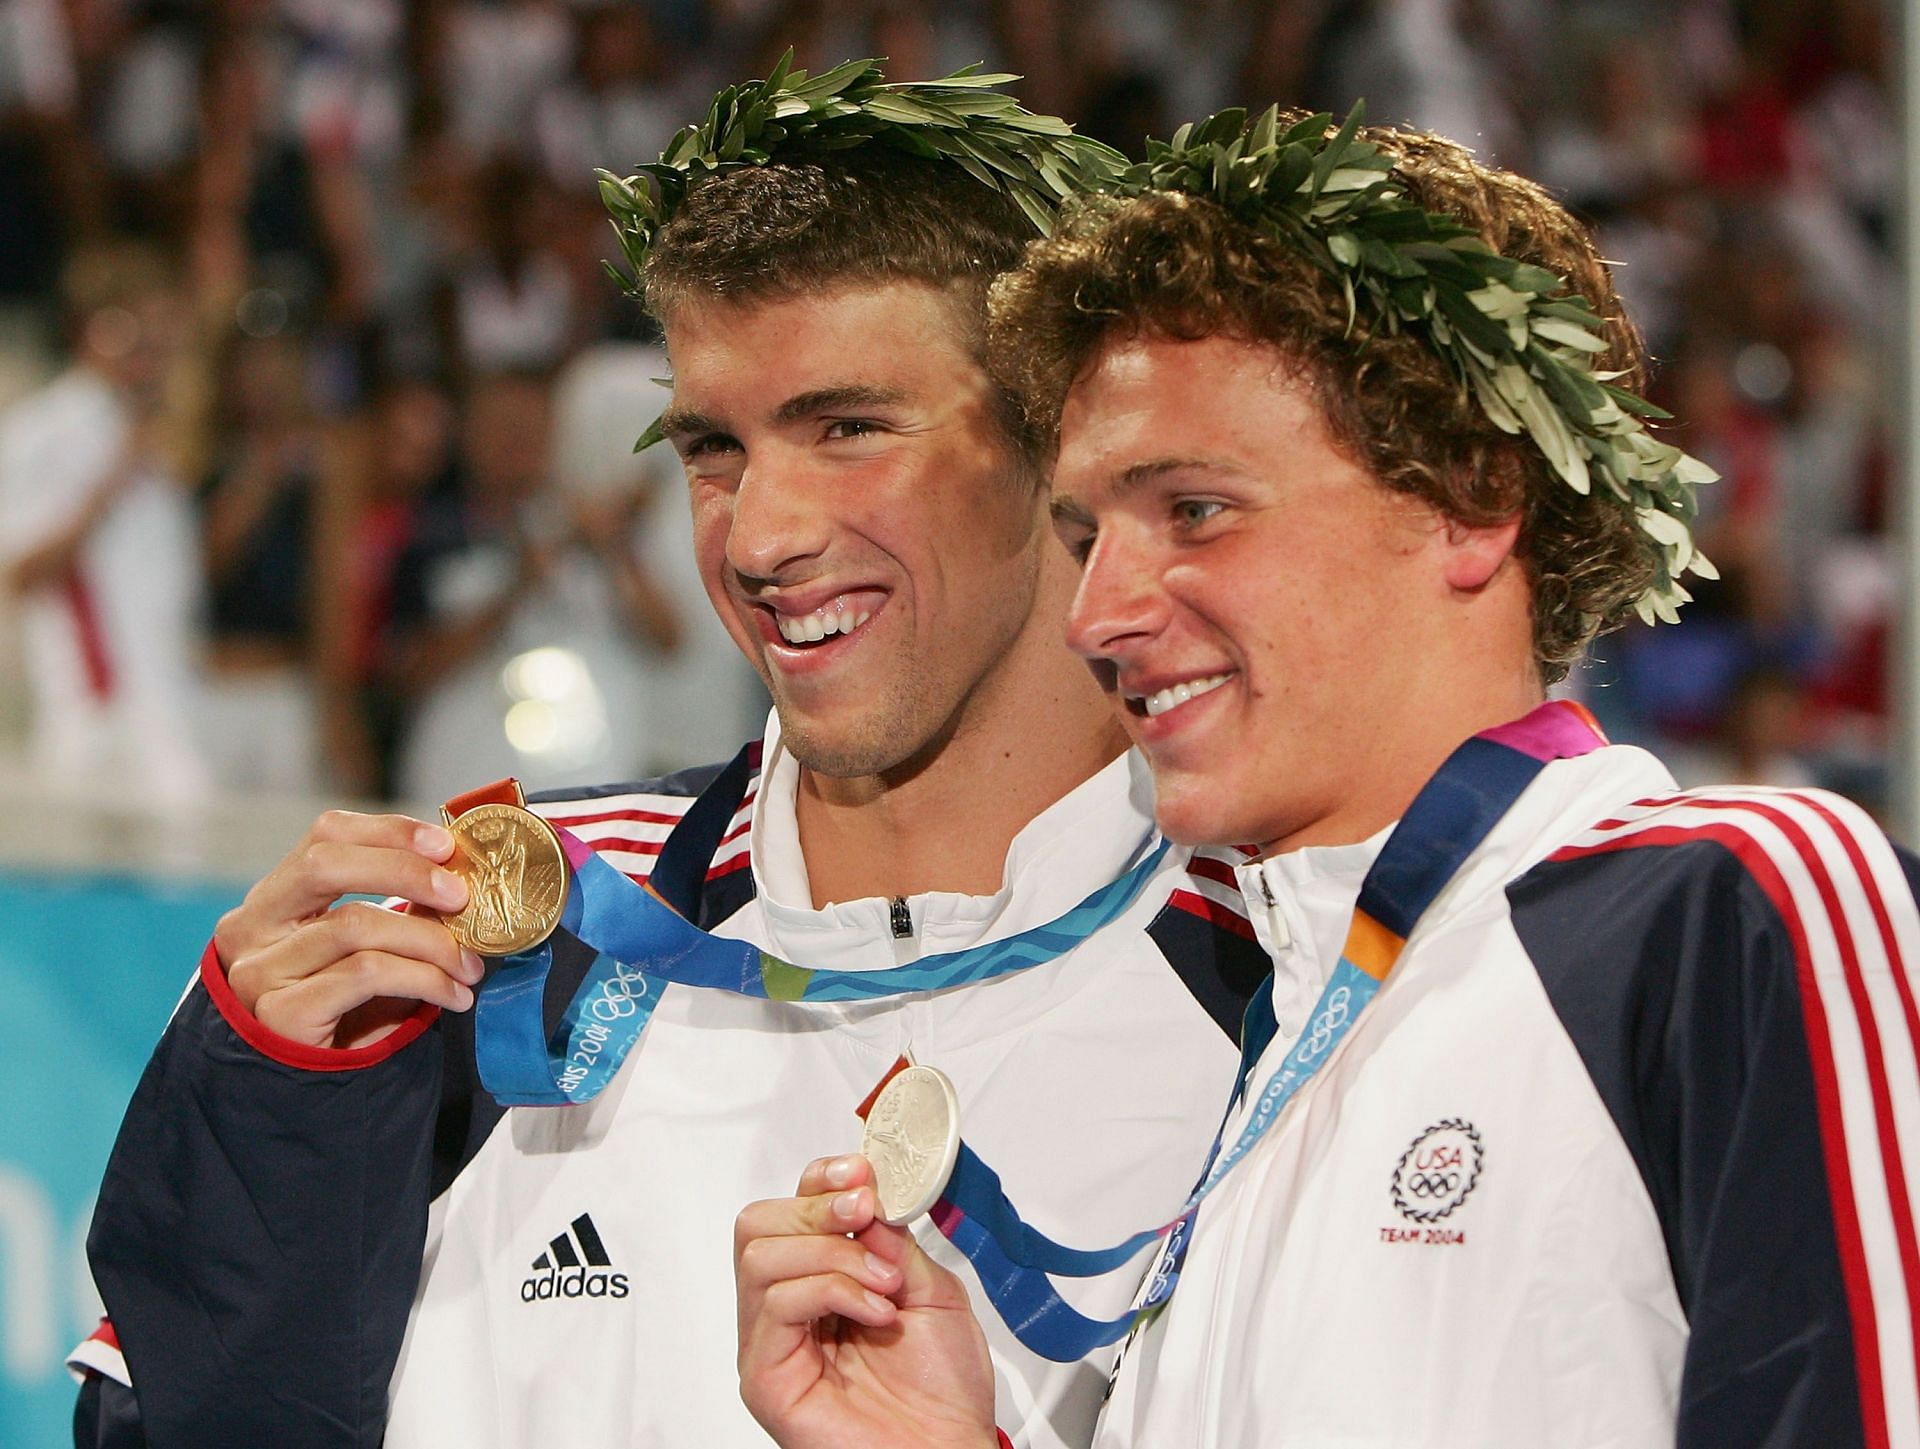 Phelps (L) and Lochte (R) at the medal ceremony for 200 IM, Athens 2004 (Image via Getty)